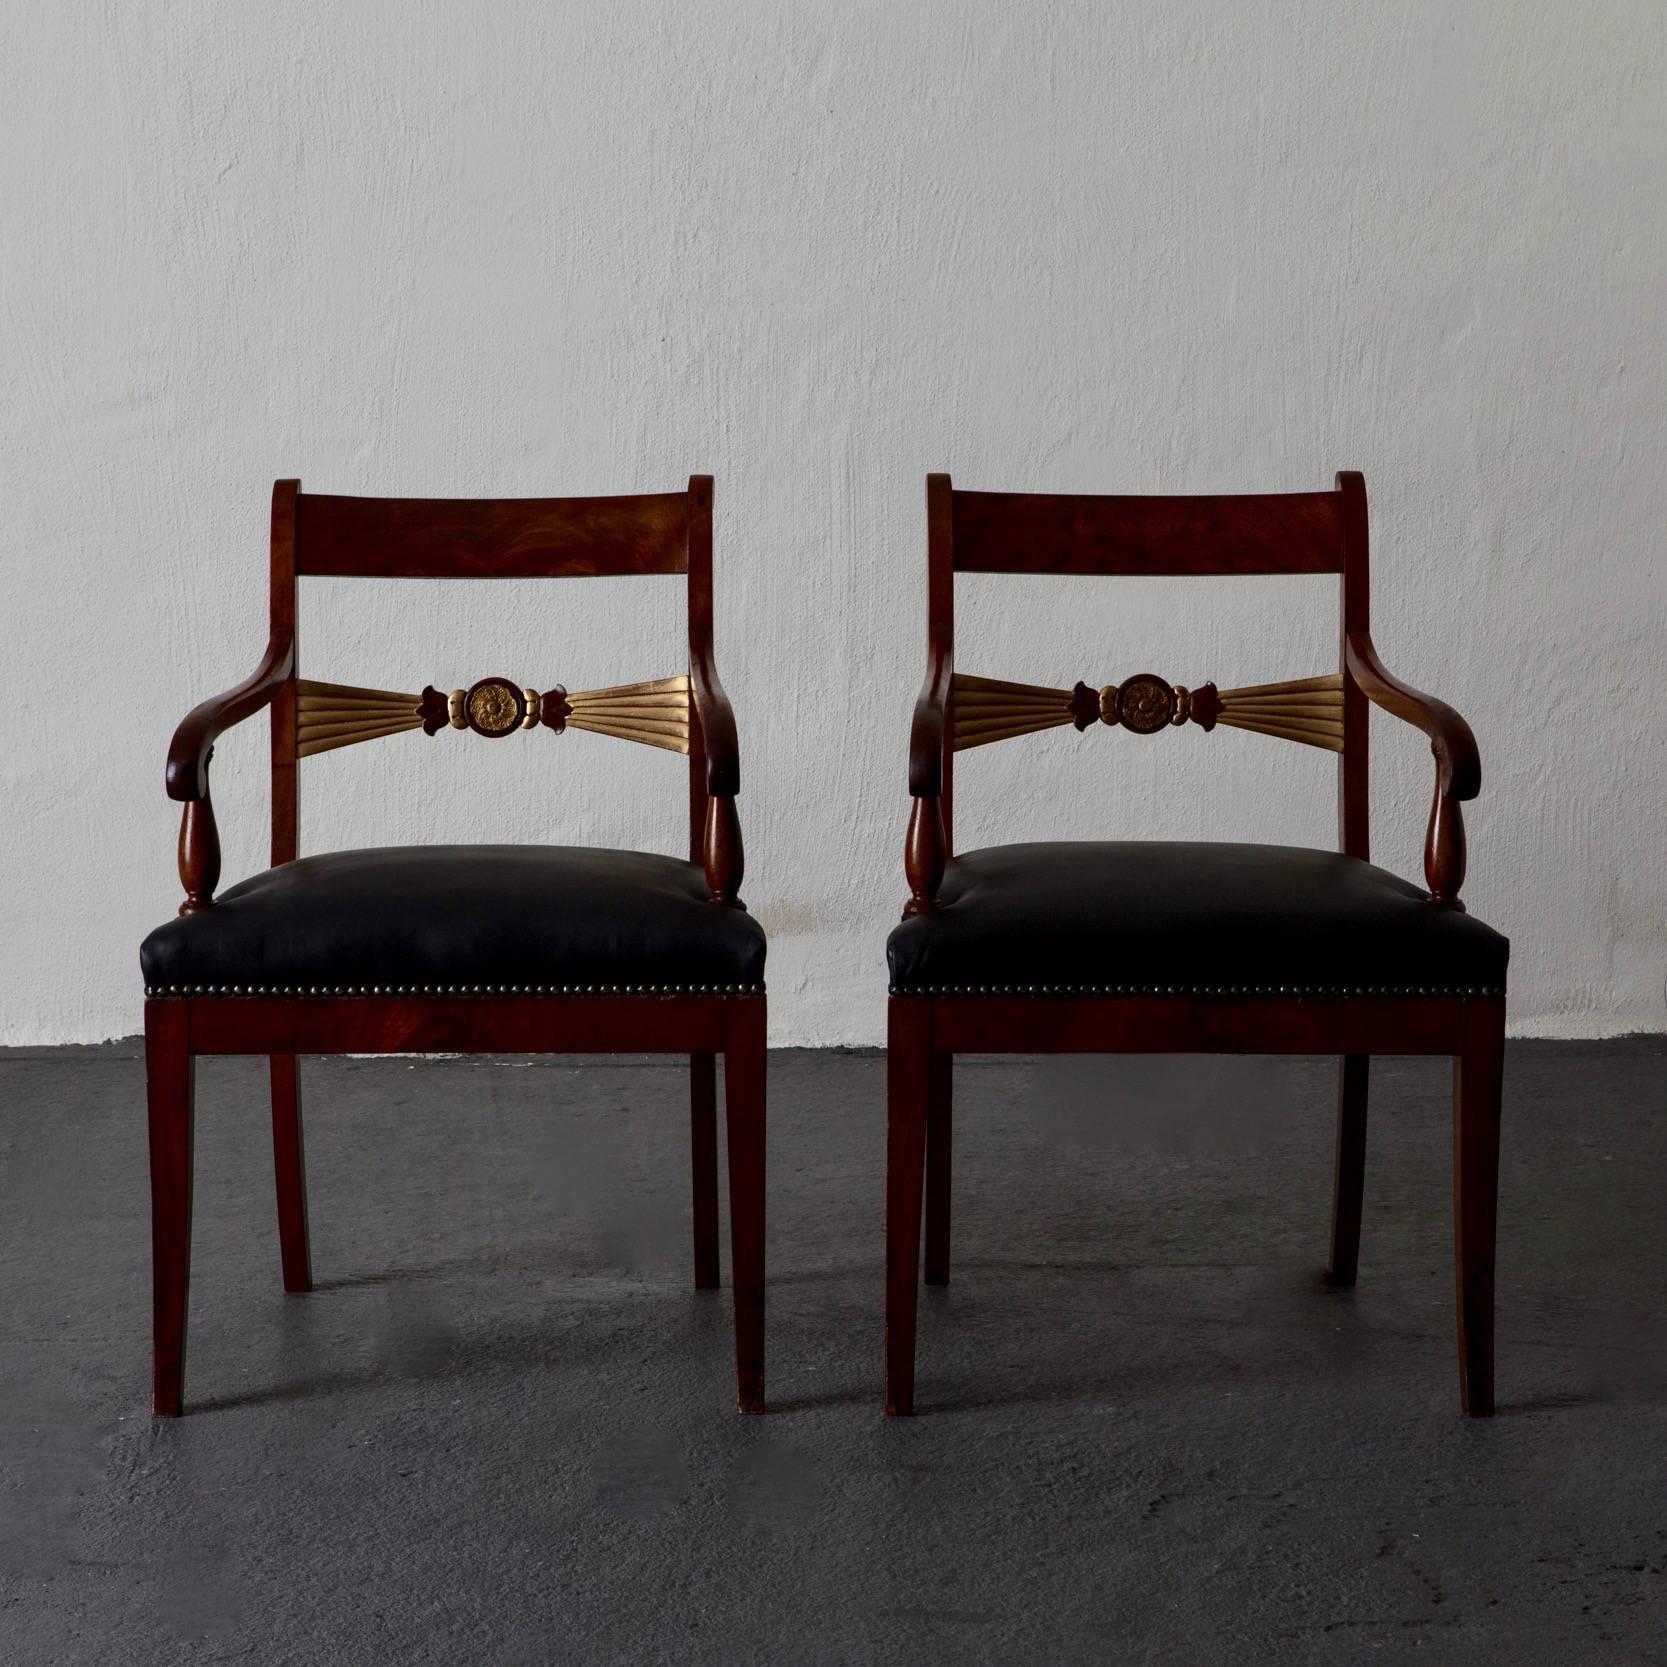 Pair of mahogany armchairs with gilded details 19th century black leather, England. A pair of armchairs made in England during the Regency period 19th century. Frame made in mahogany with gilded details. Upholstered in black leather. Restored.